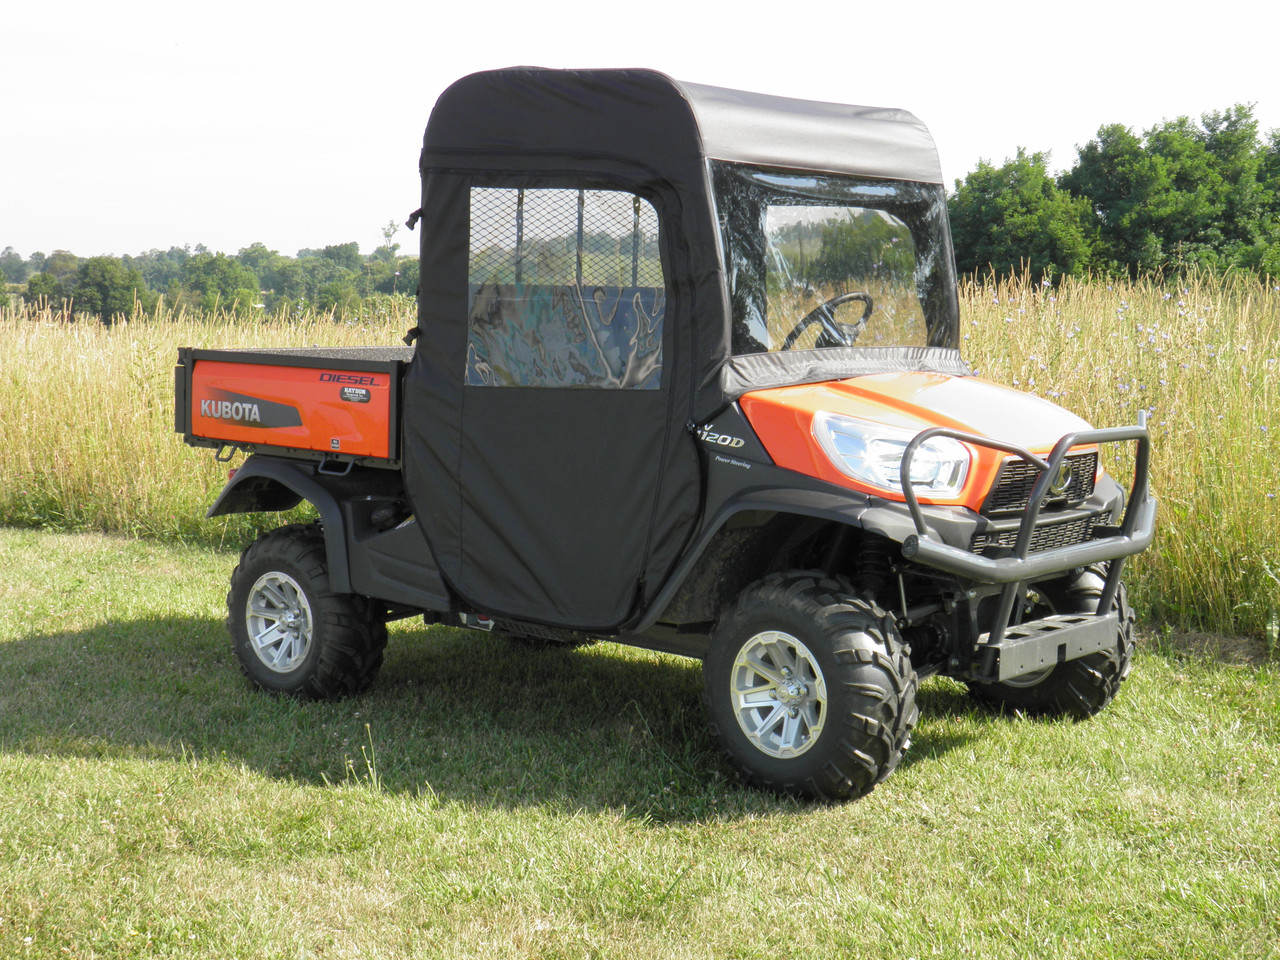 3 Star side x side Kubota RTV X900/X1120 full cab enclosure with vinyl windshield front and side angle view